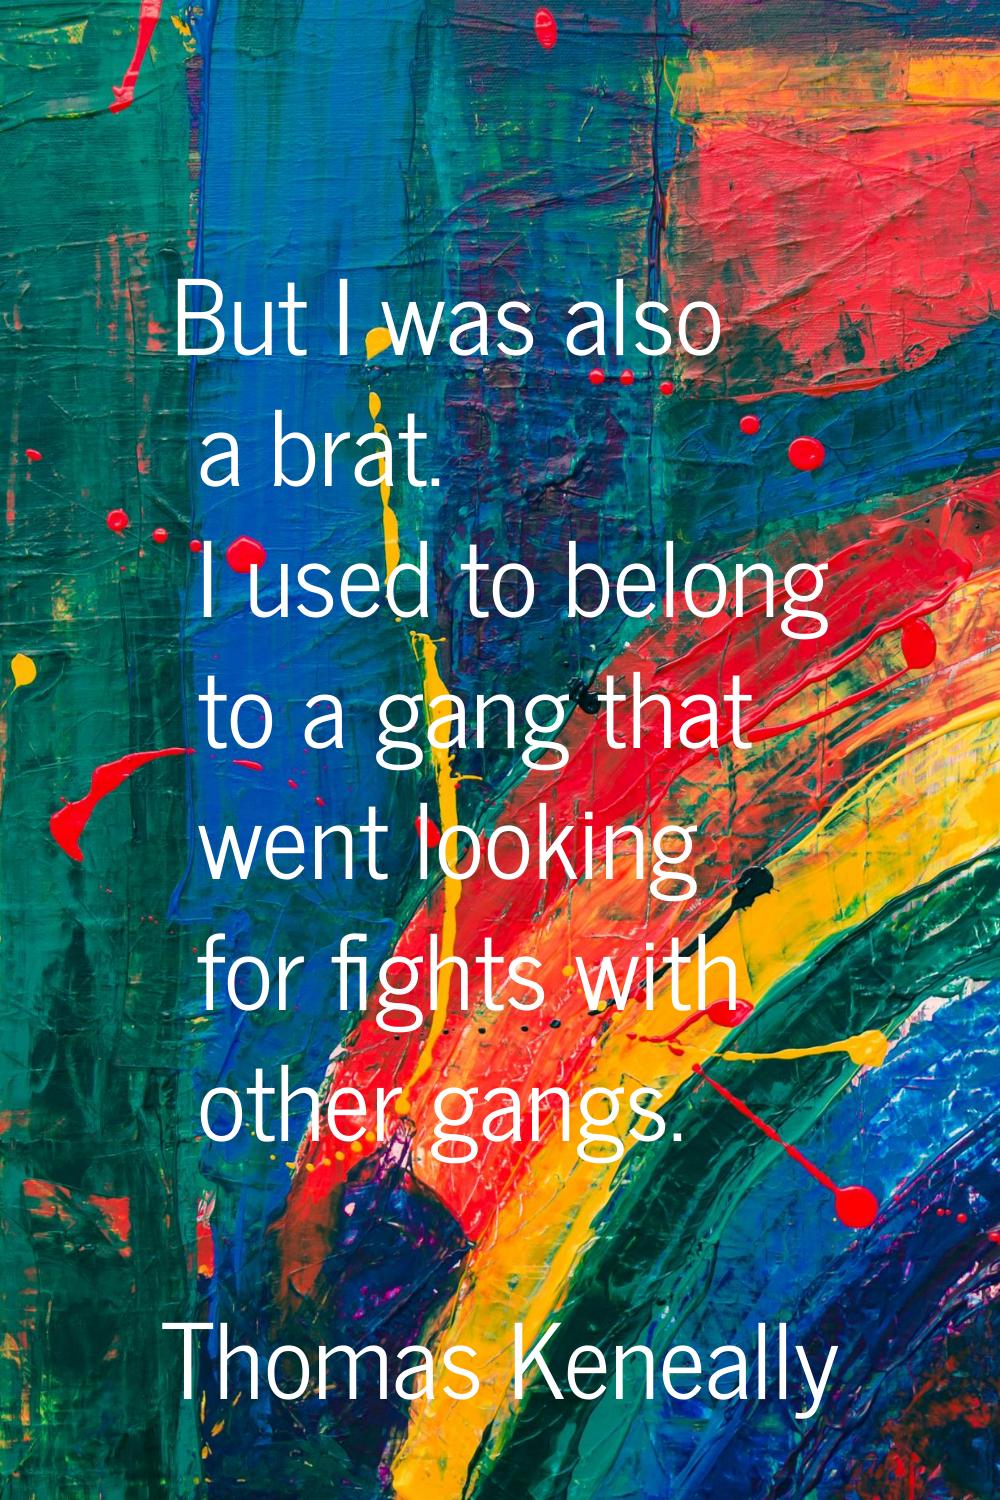 But I was also a brat. I used to belong to a gang that went looking for fights with other gangs.